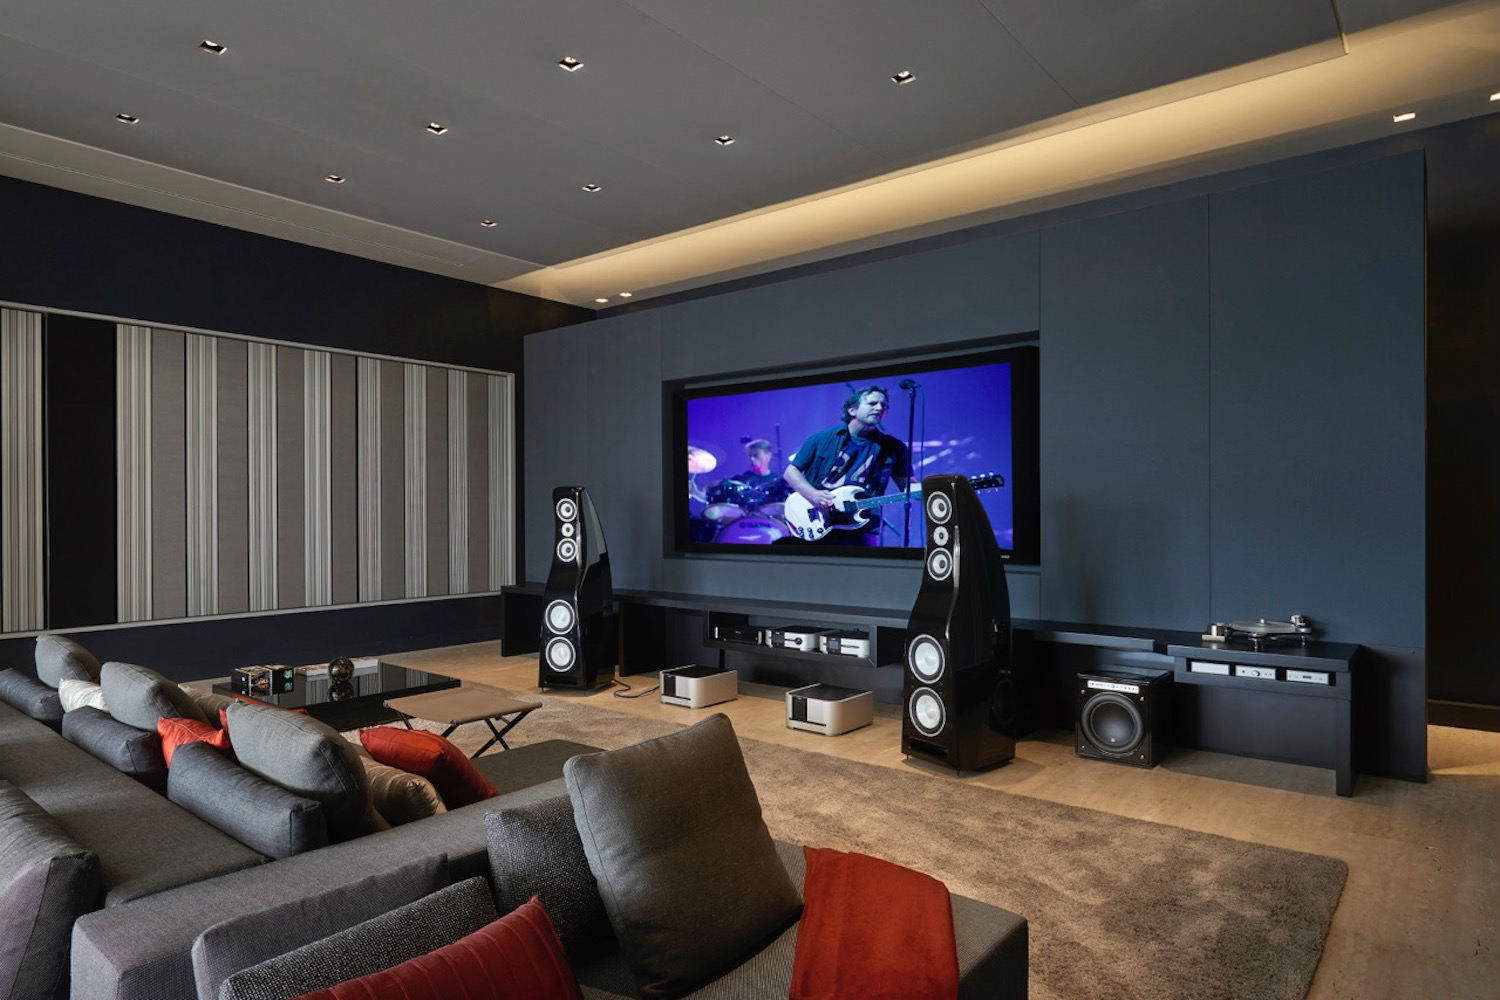 The Ultimate Home Theater variable acoustic panels